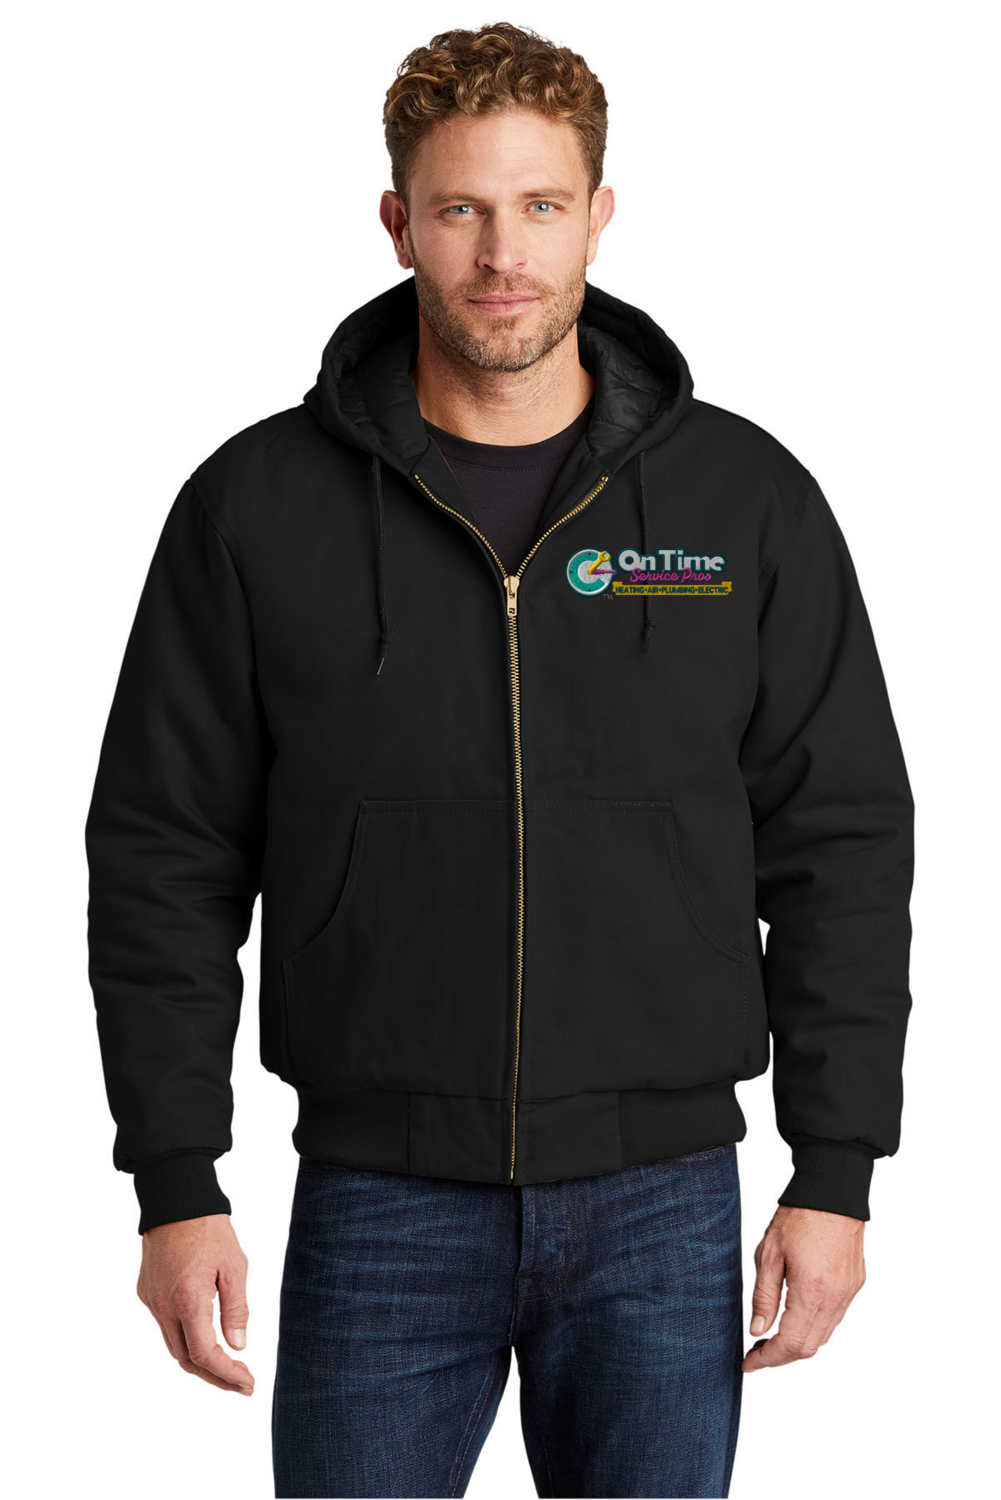 On Time Service Pros CornerStone Duck Cloth Hooded Work Jacket - Regular & Tall